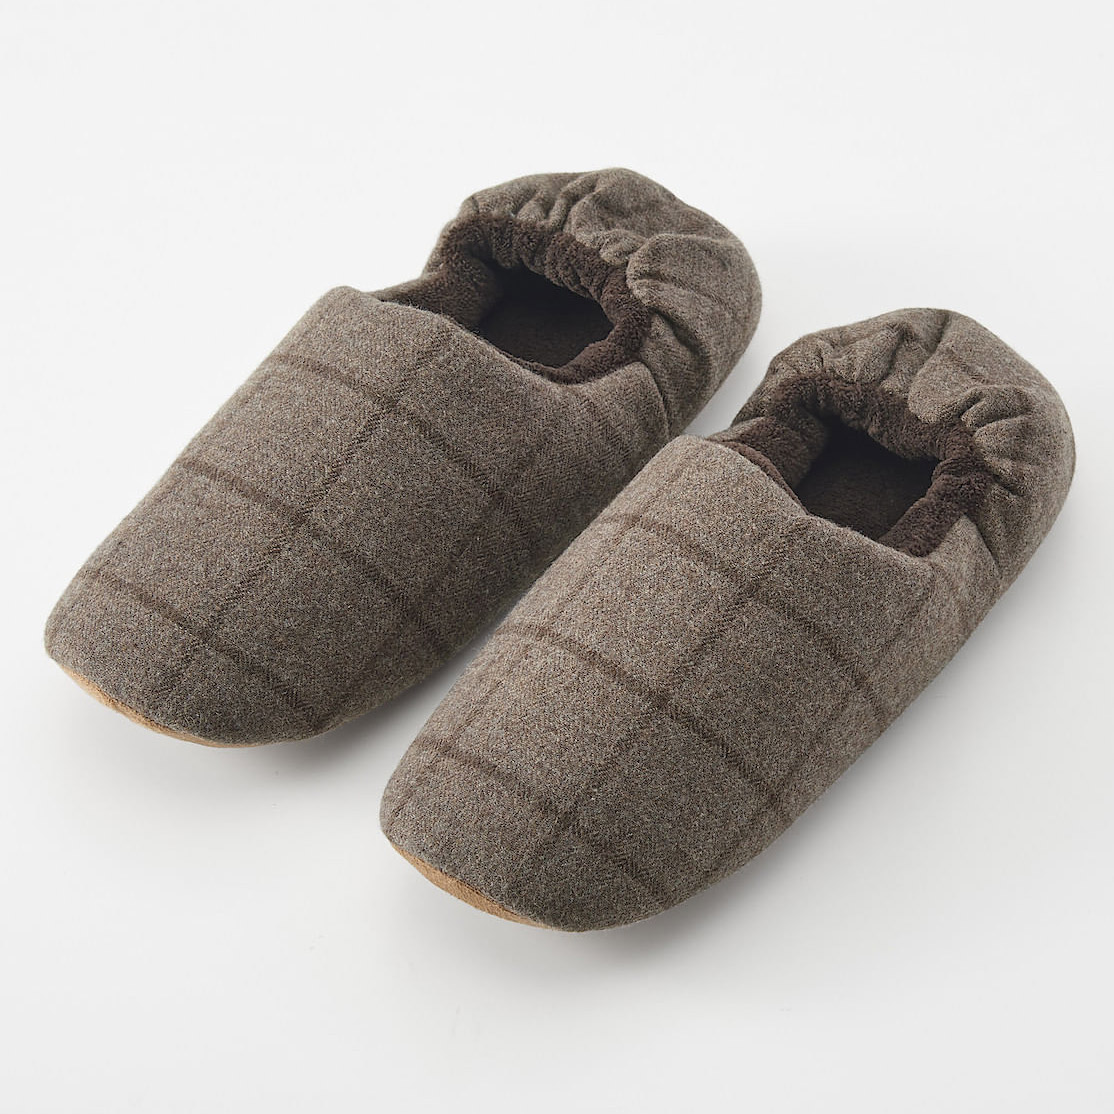 Muji Slippers and Room Shoes